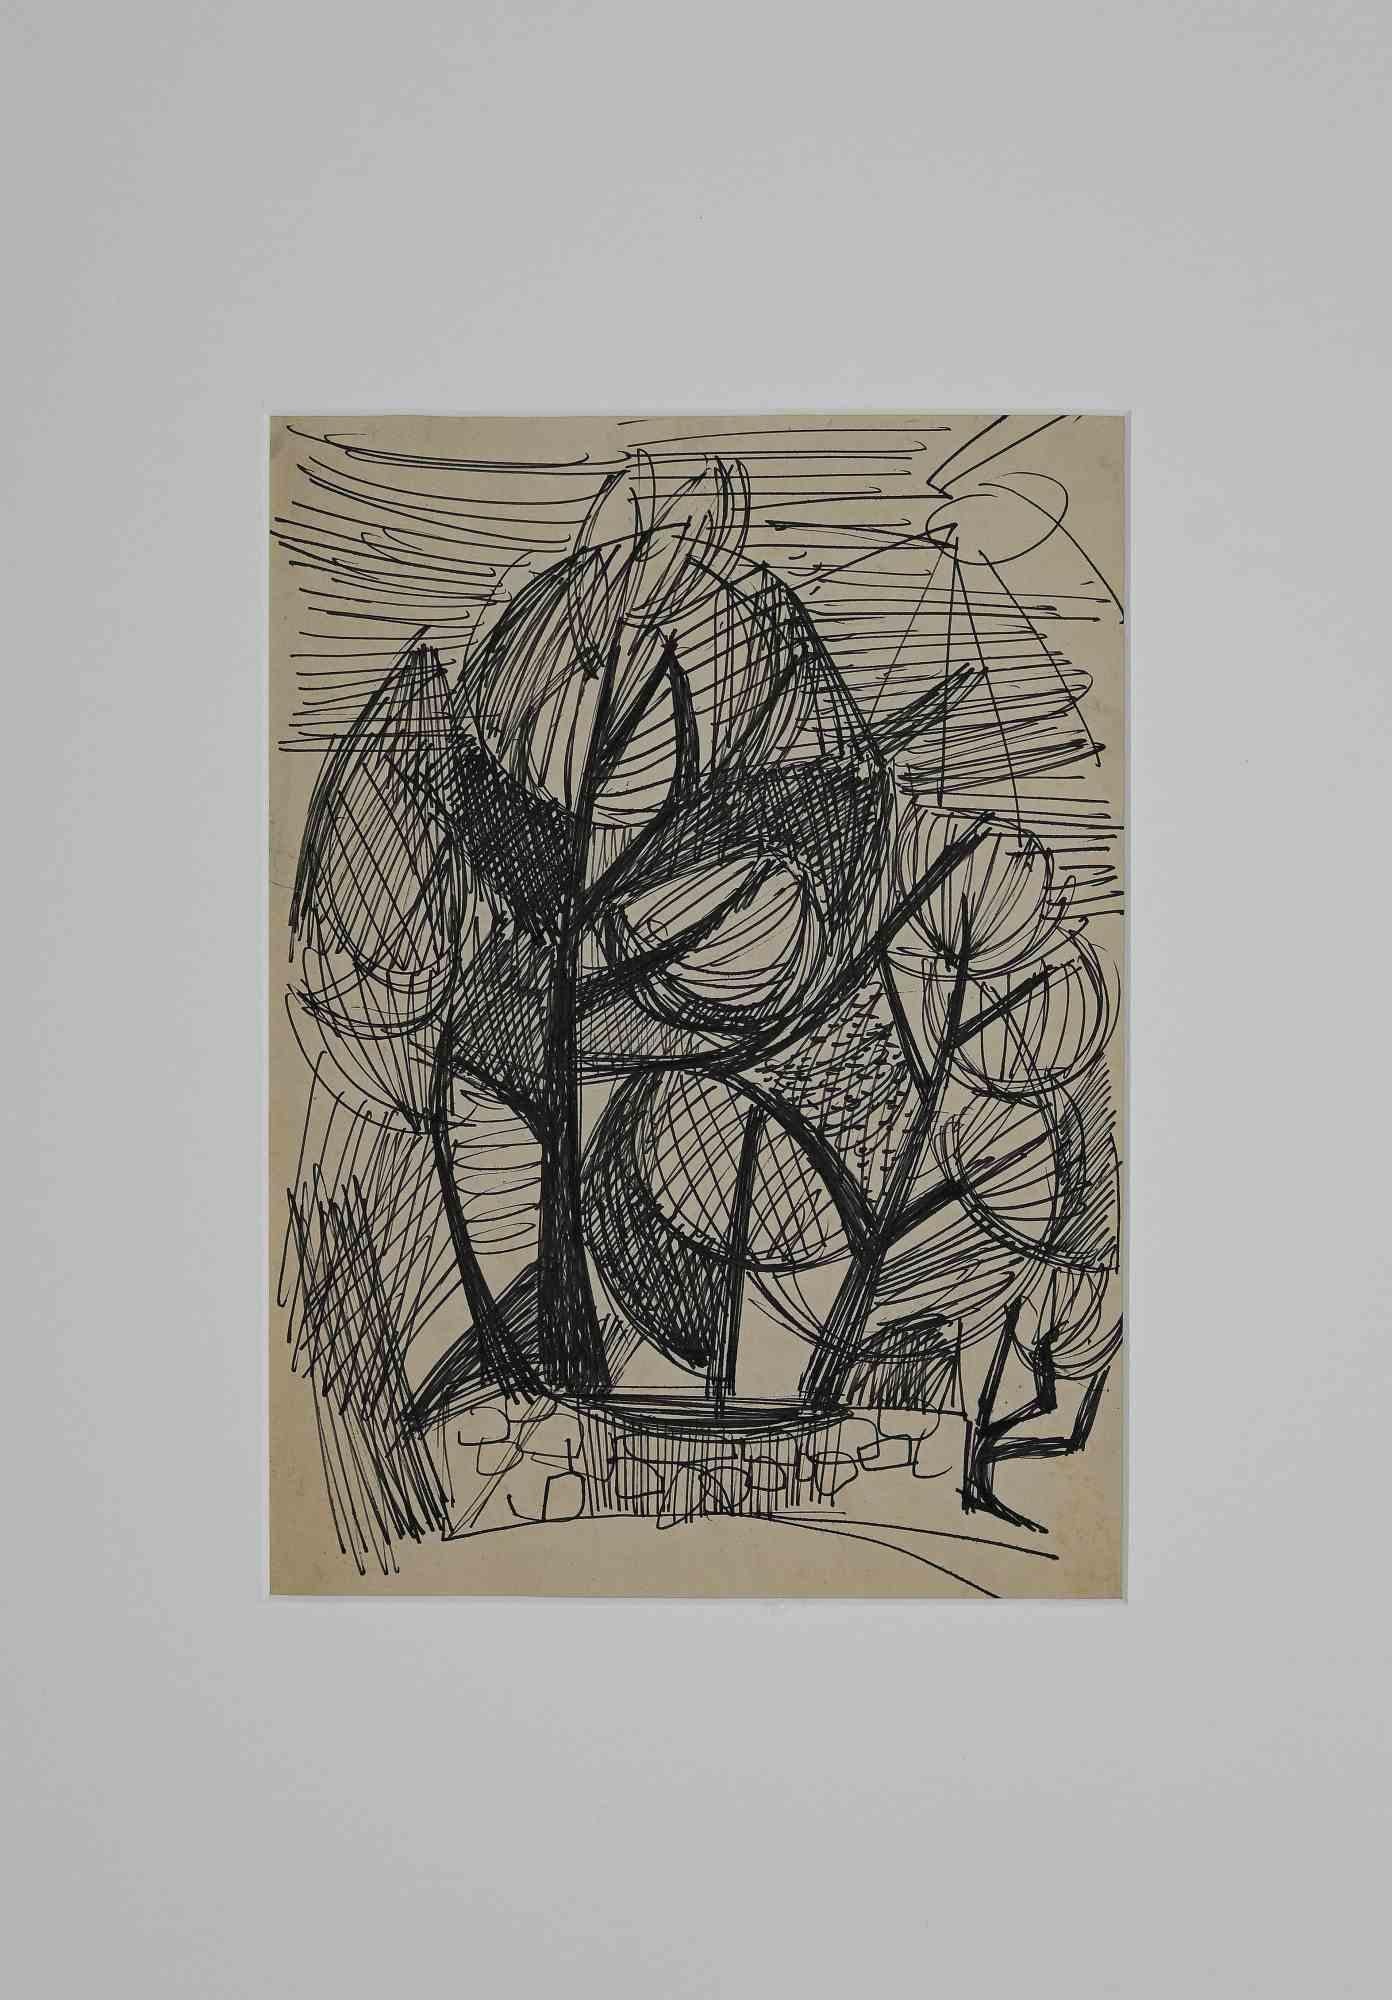 Unknown Figurative Art - Landscape with Trees - Original Drawing - 1950s